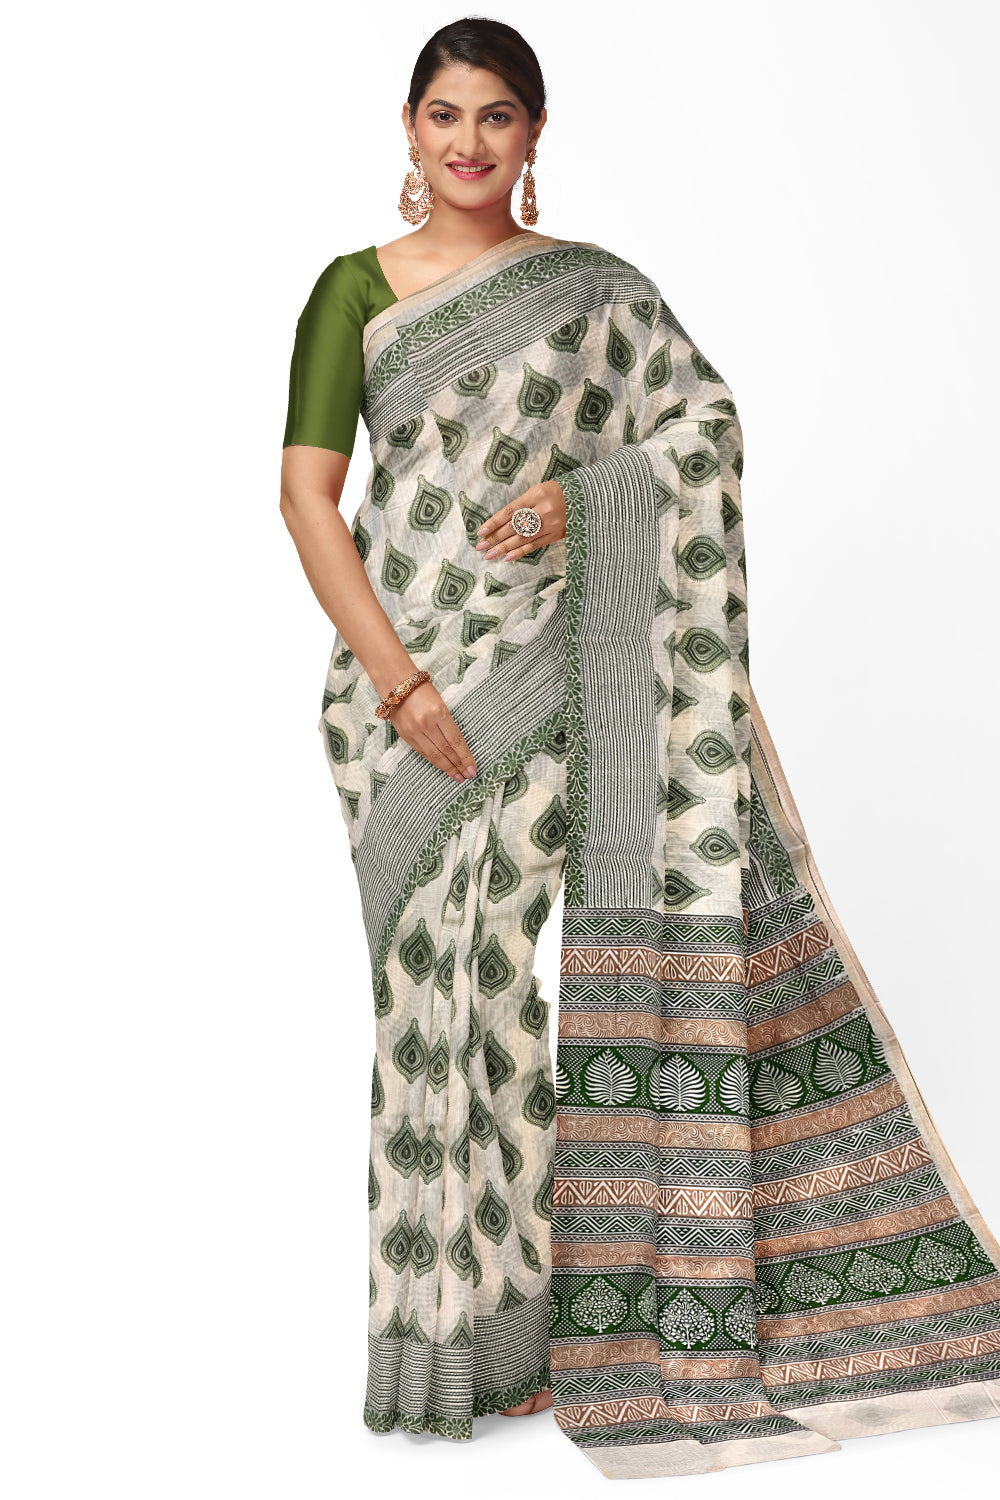 Southloom Cotton Light Brown Saree with Green Paisley Prints